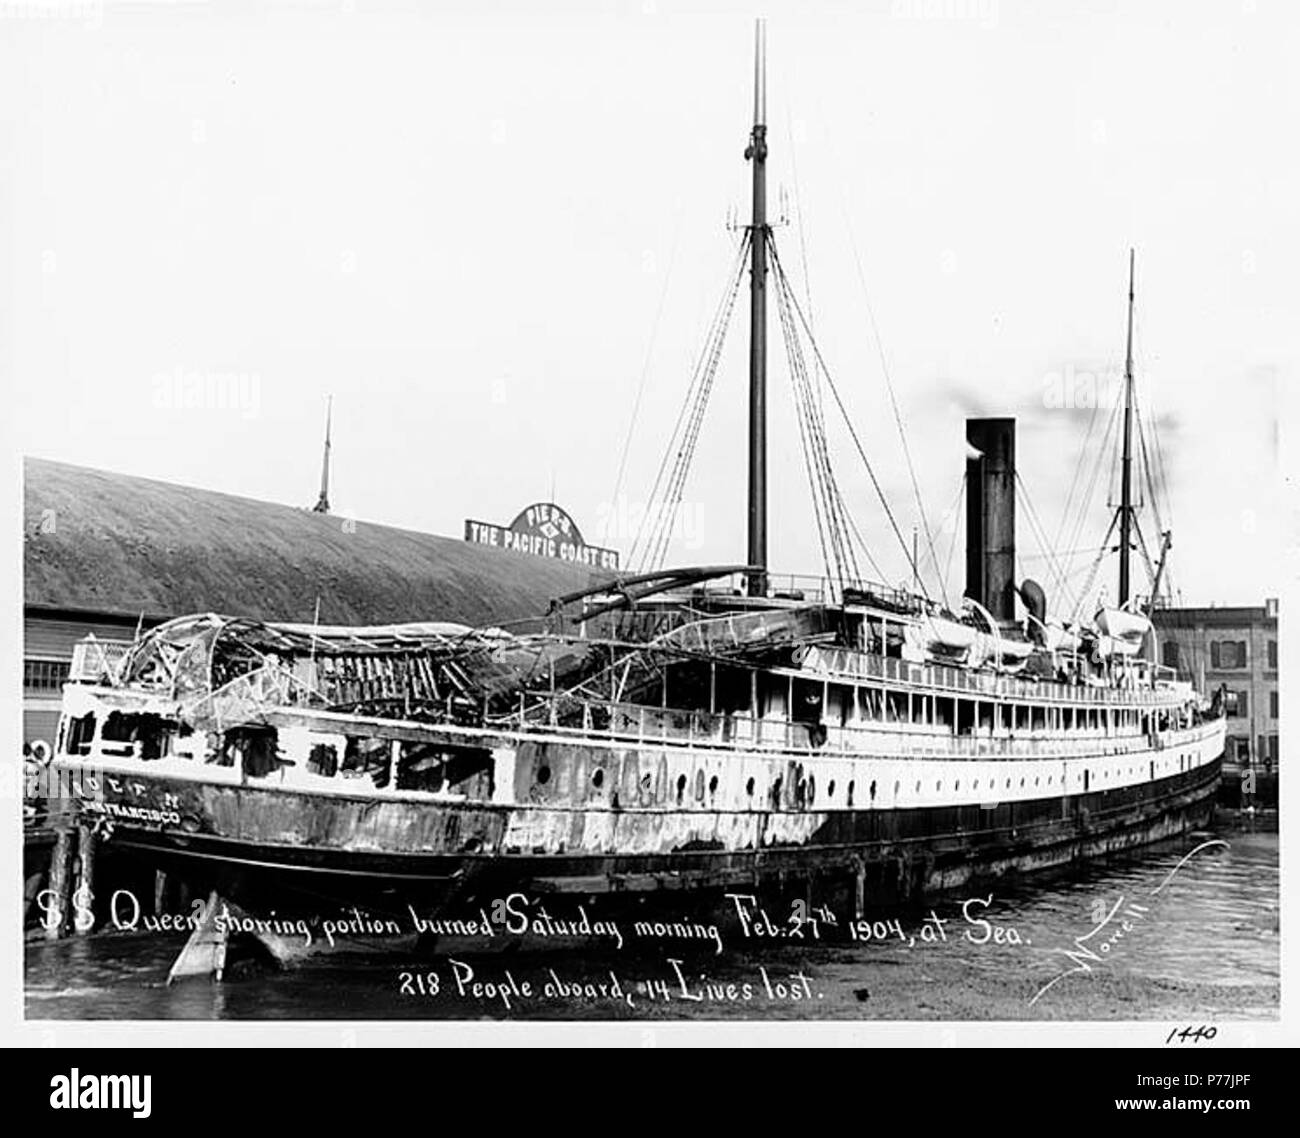 . English: Steamship QUEEN at dock in Port Townsend, Washington, following a fire at sea on February 27, 1904 . English: Caption on image: S.S. Queen showing portion burned Saturday morning Feb. 27th 1904, at sea. 218 people aboard, 14 lives lost. Nowell, 1440 The steamship QUEEN of the Pacific Coast Steamship Co. was on her scheduled passenger run up the coast from San Francisco to Puget Sound when, off Tillamook Head, Oregon, at four o'clock on the morning of February 27, 1904, fire broke out below decks and quickly enveloped the ship's stern. The captain and crew battled the blaze with utmo Stock Photo